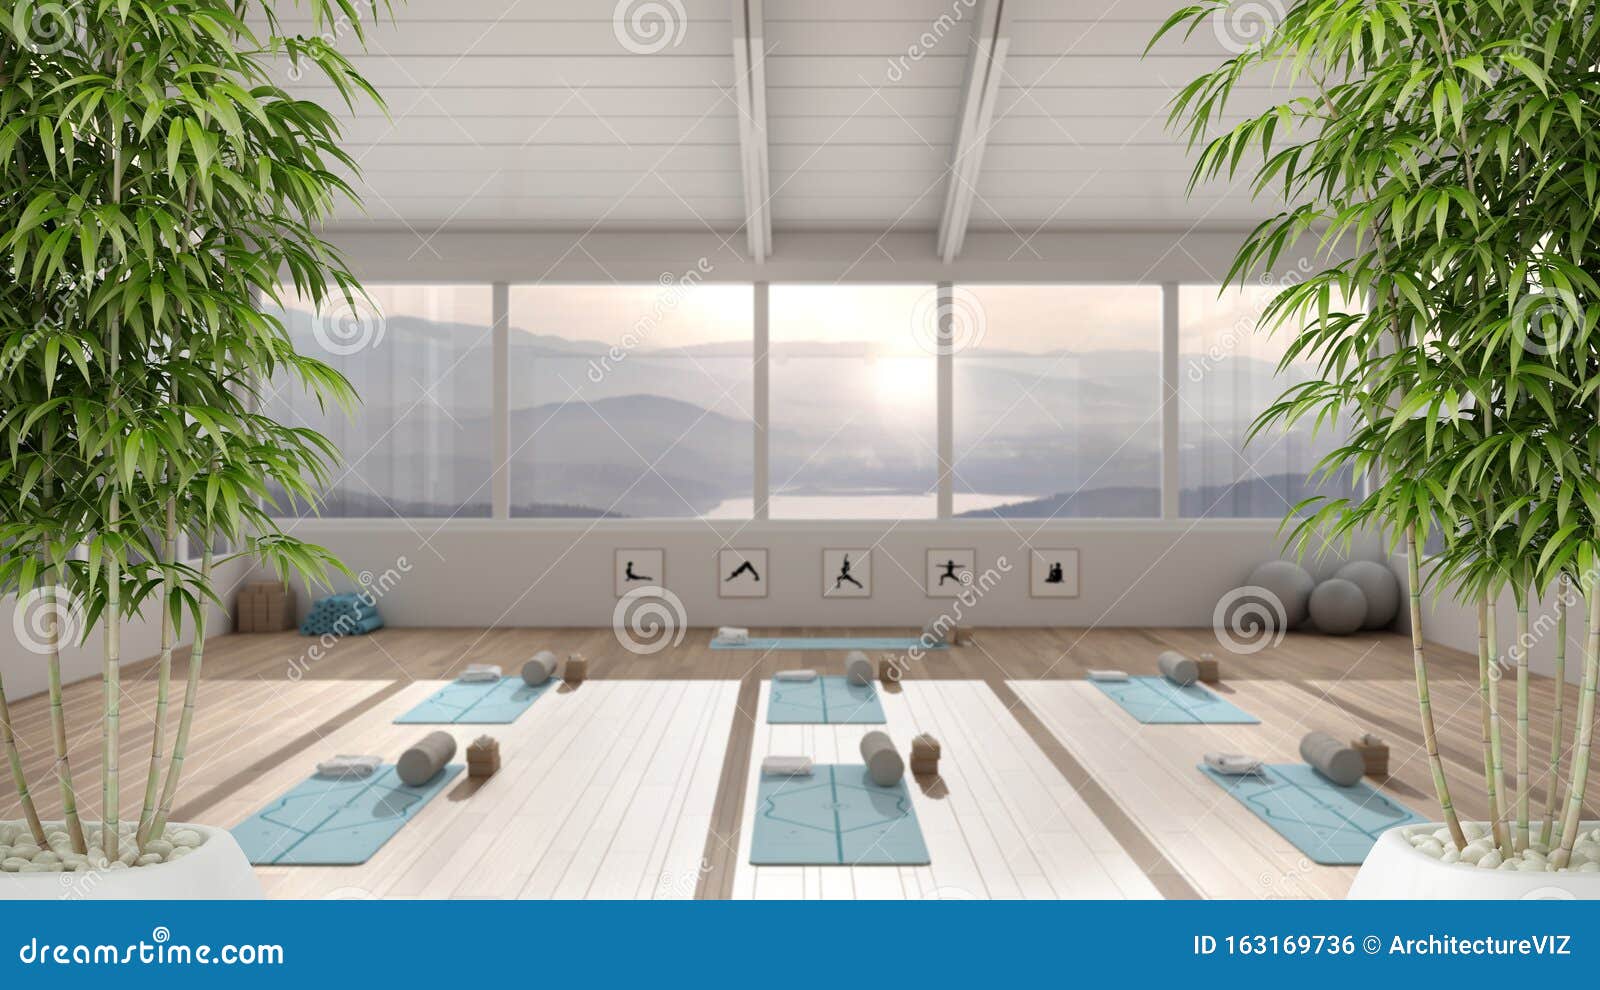 Zen Interior with Potted Bamboo Plant, Natural Interior Design